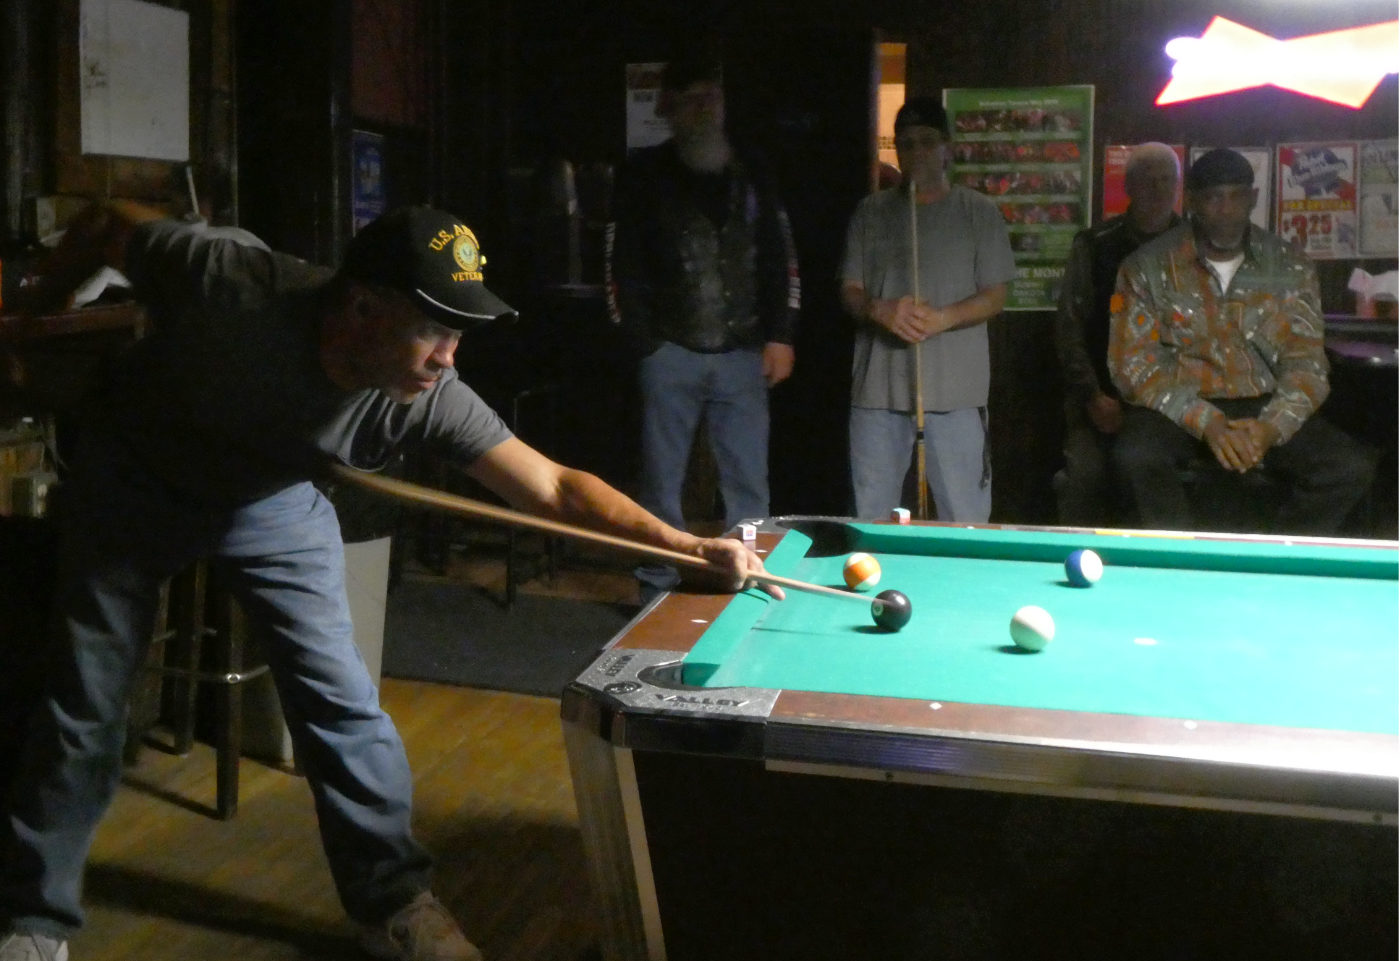 Man leaning over readying a shot on a pool table as three others look on